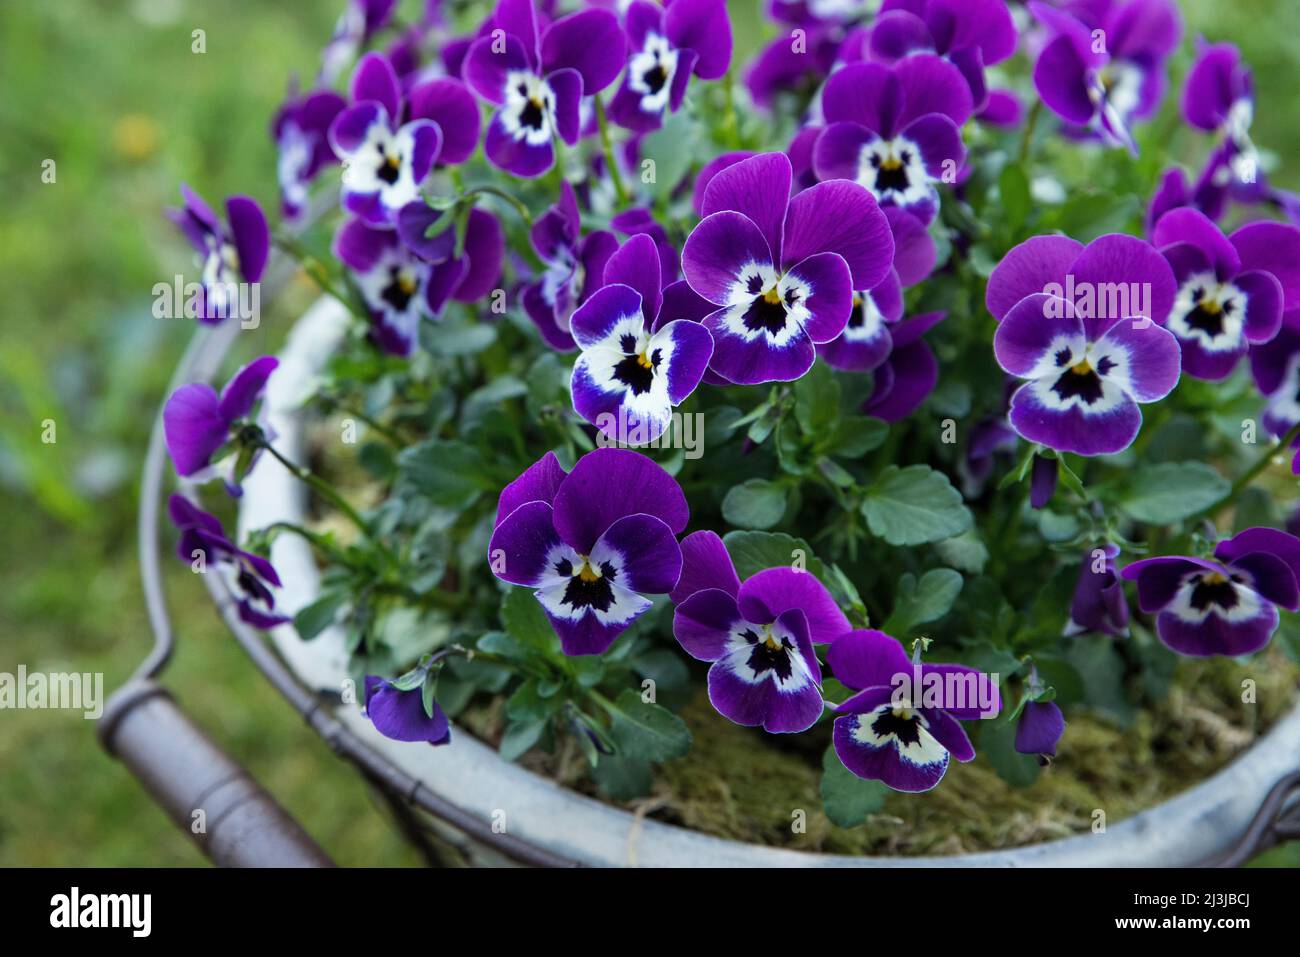 Horned violet (Viola cornuta) in a pot, flowers in purple and white Stock Photo